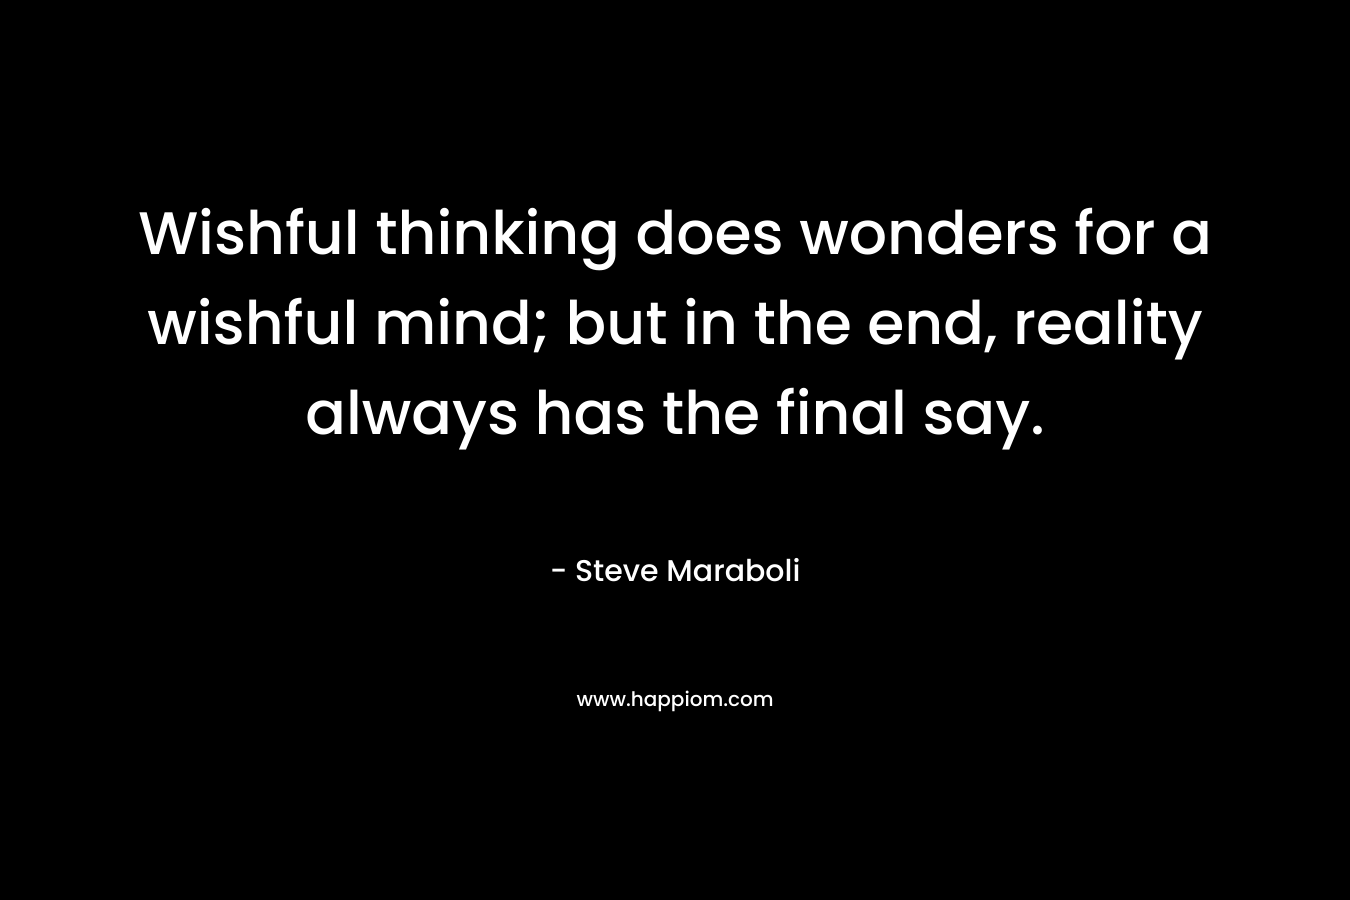 Wishful thinking does wonders for a wishful mind; but in the end, reality always has the final say.